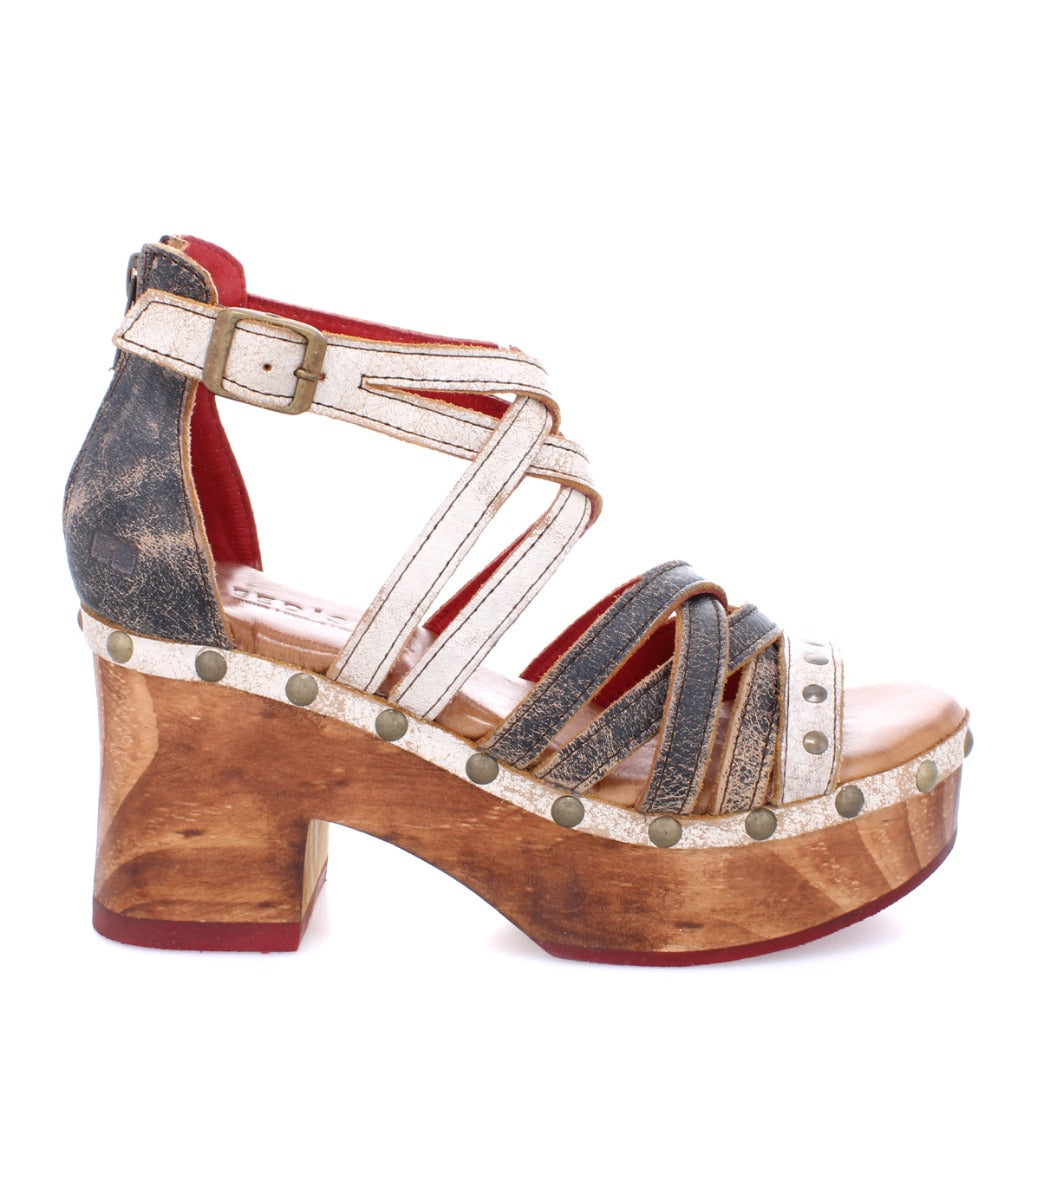 A Antonelli women's sandal with a wooden platform and straps by Bed Stu.